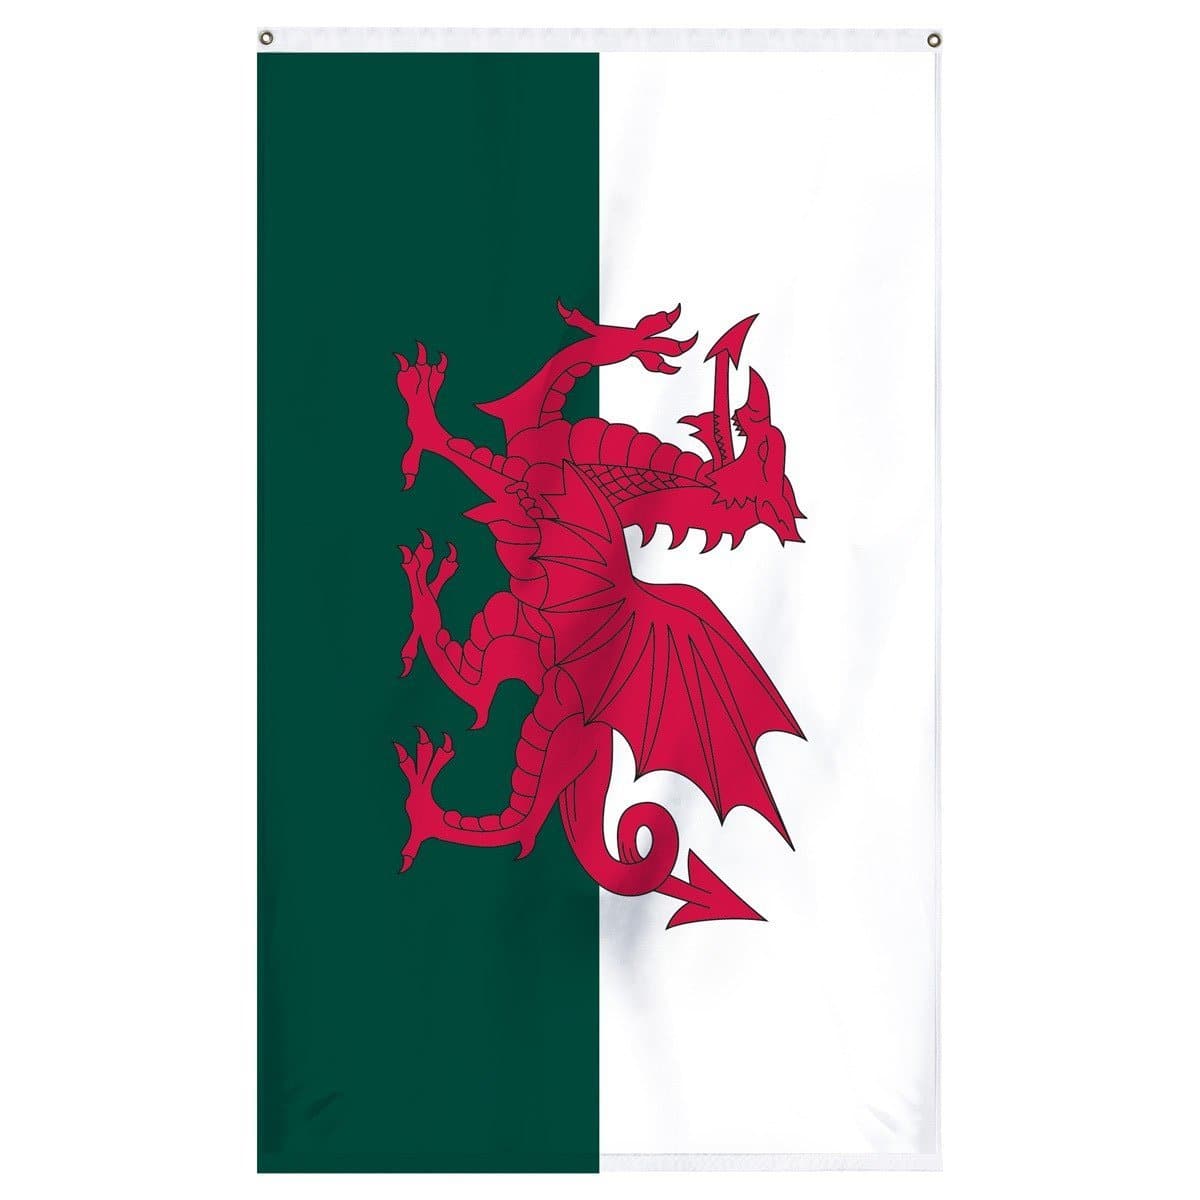 Wales National flag for sale to buy online from Atlantic Flag and Pole, an American company. A white and green bar flag with a red dragon.